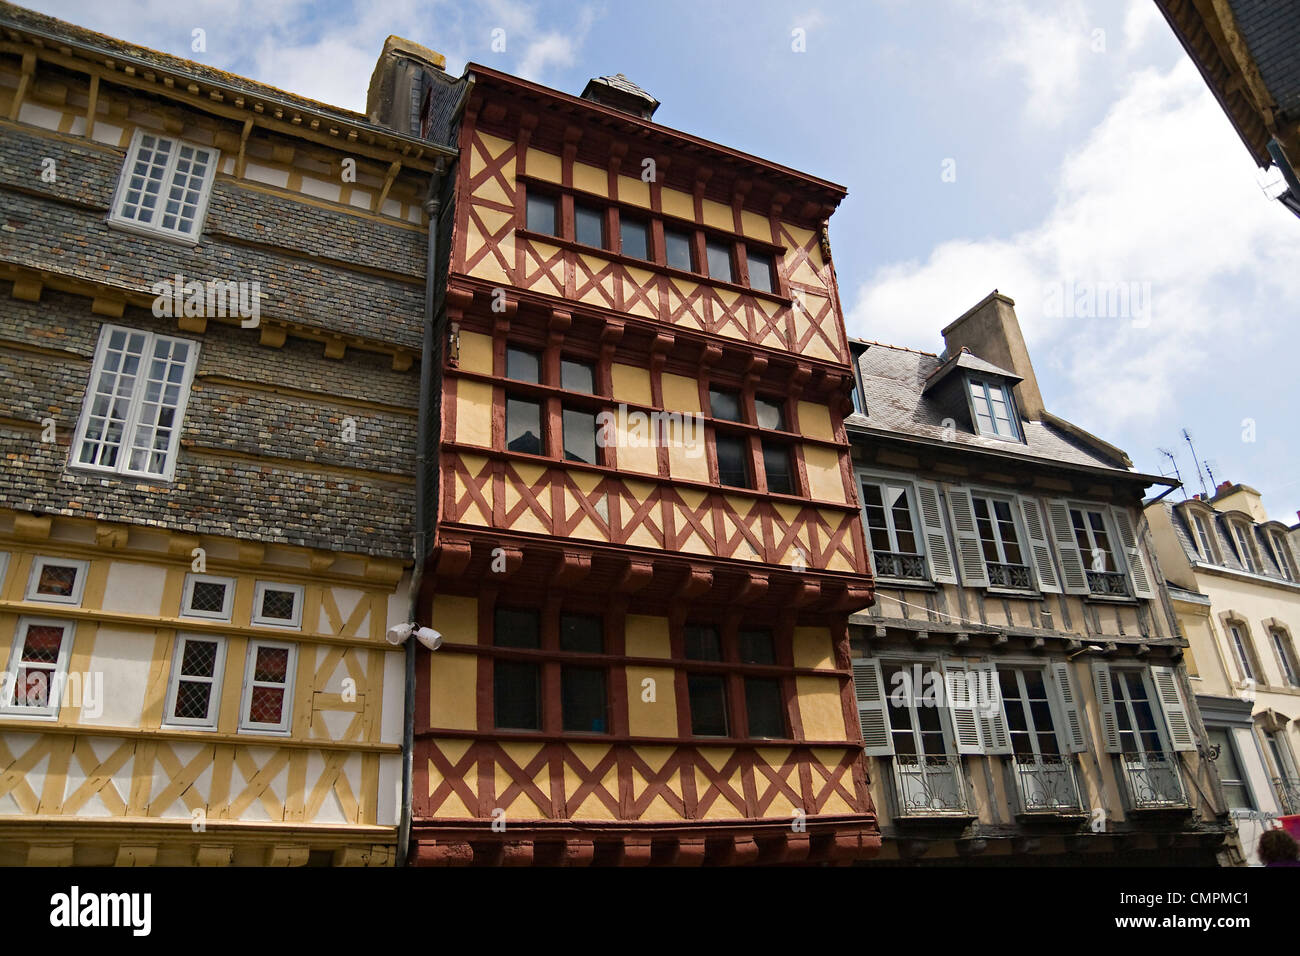 Quimper, timbered ancient houses in Brittany, France Stock Photo